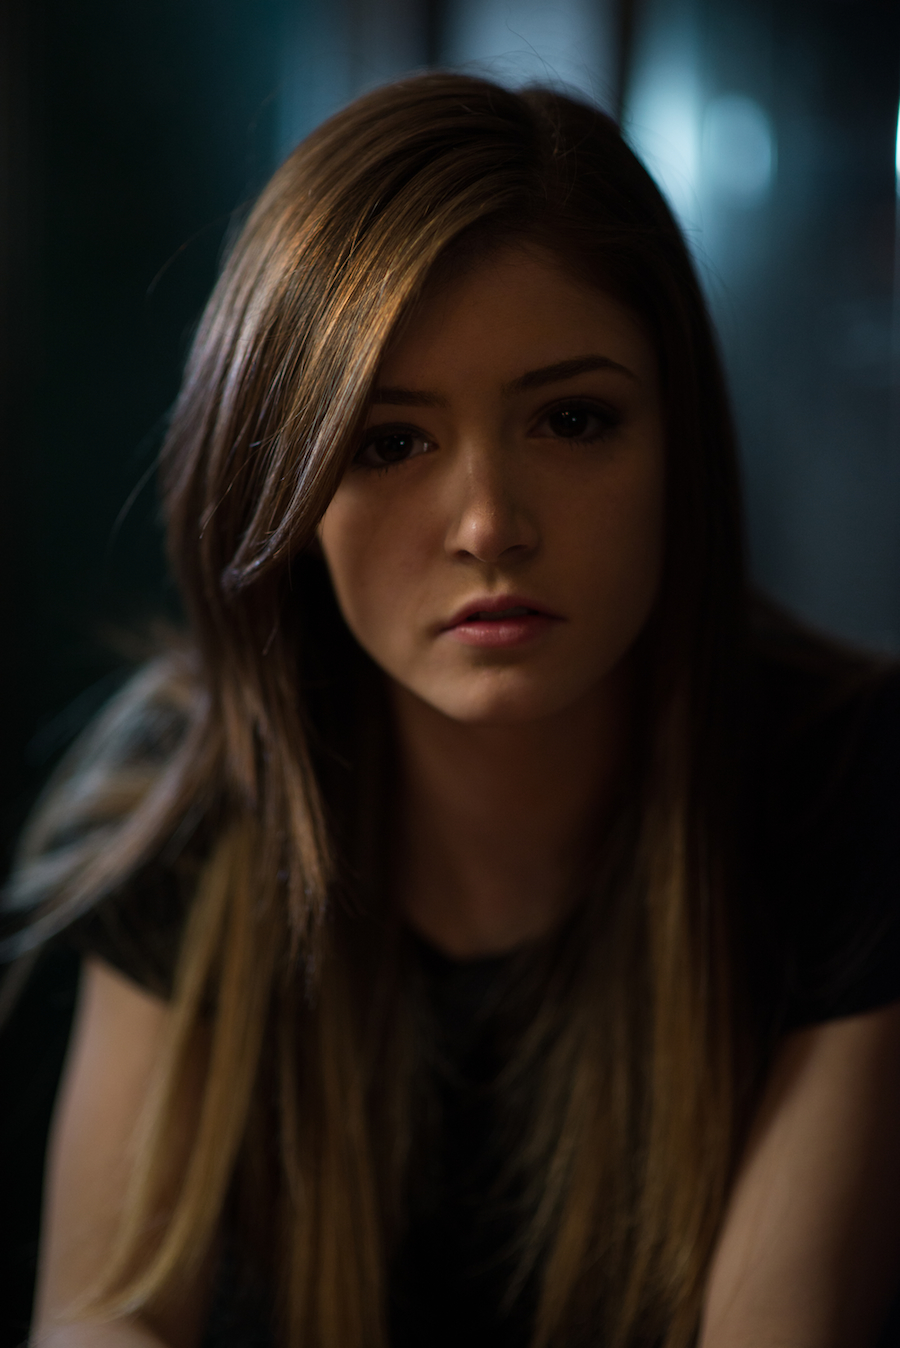 Chrissy Costanza Image Full HD Pictures